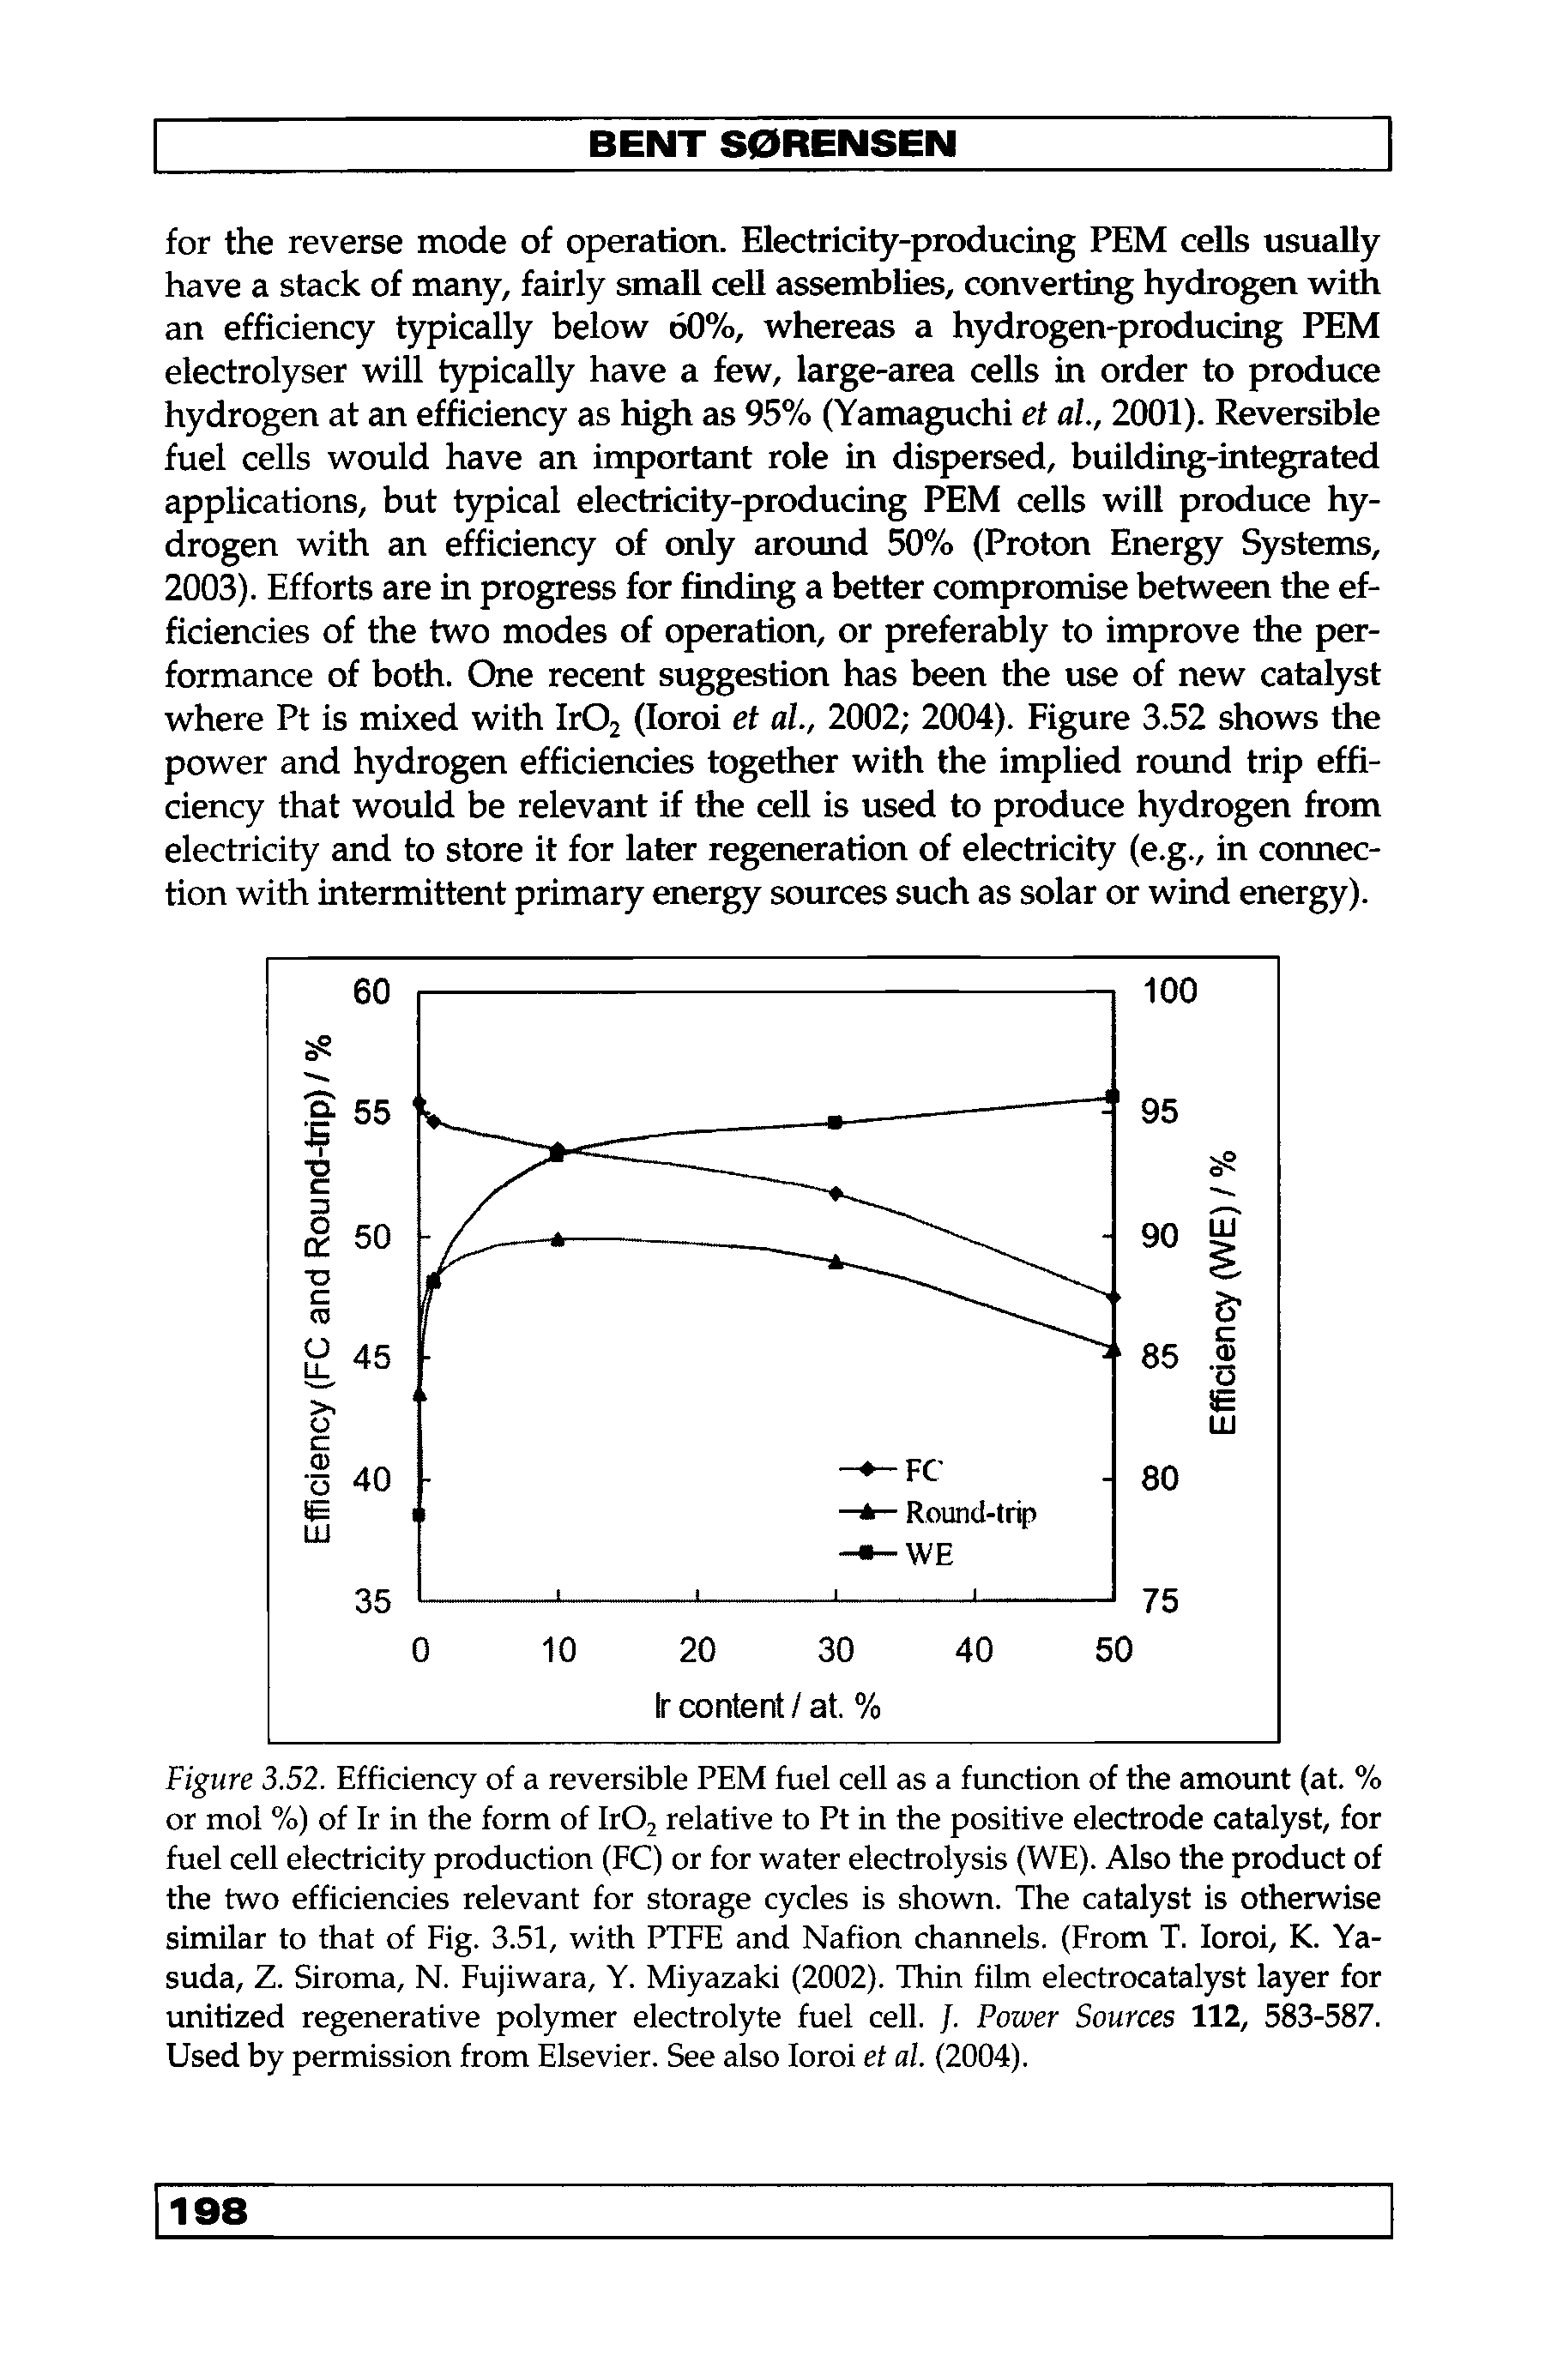 Figure 3.52. Efficiency of a reversible PEM fuel cell as a function of the amount (at. % or mol %) of Ir in the form of IrOj relative to Pt in the positive electrode catalyst, for fuel cell electricity production (EC) or for water electrolysis (WE). Also the product of the two efficiencies relevant for storage cycles is shown. The catalyst is otherwise similar to that of Fig. 3.51, with PTFE and Nation channels. (From T. loroi, K. Ya-suda, Z. Siroma, N. Fujiwara, Y. Miyazaki (2002). Thin film electrocatalyst layer for unitized regenerative polymer electrolyte fuel cell. J. Power Sources 112, 583-587. Used by permission from Elsevier. See also loroi et al. (2004).